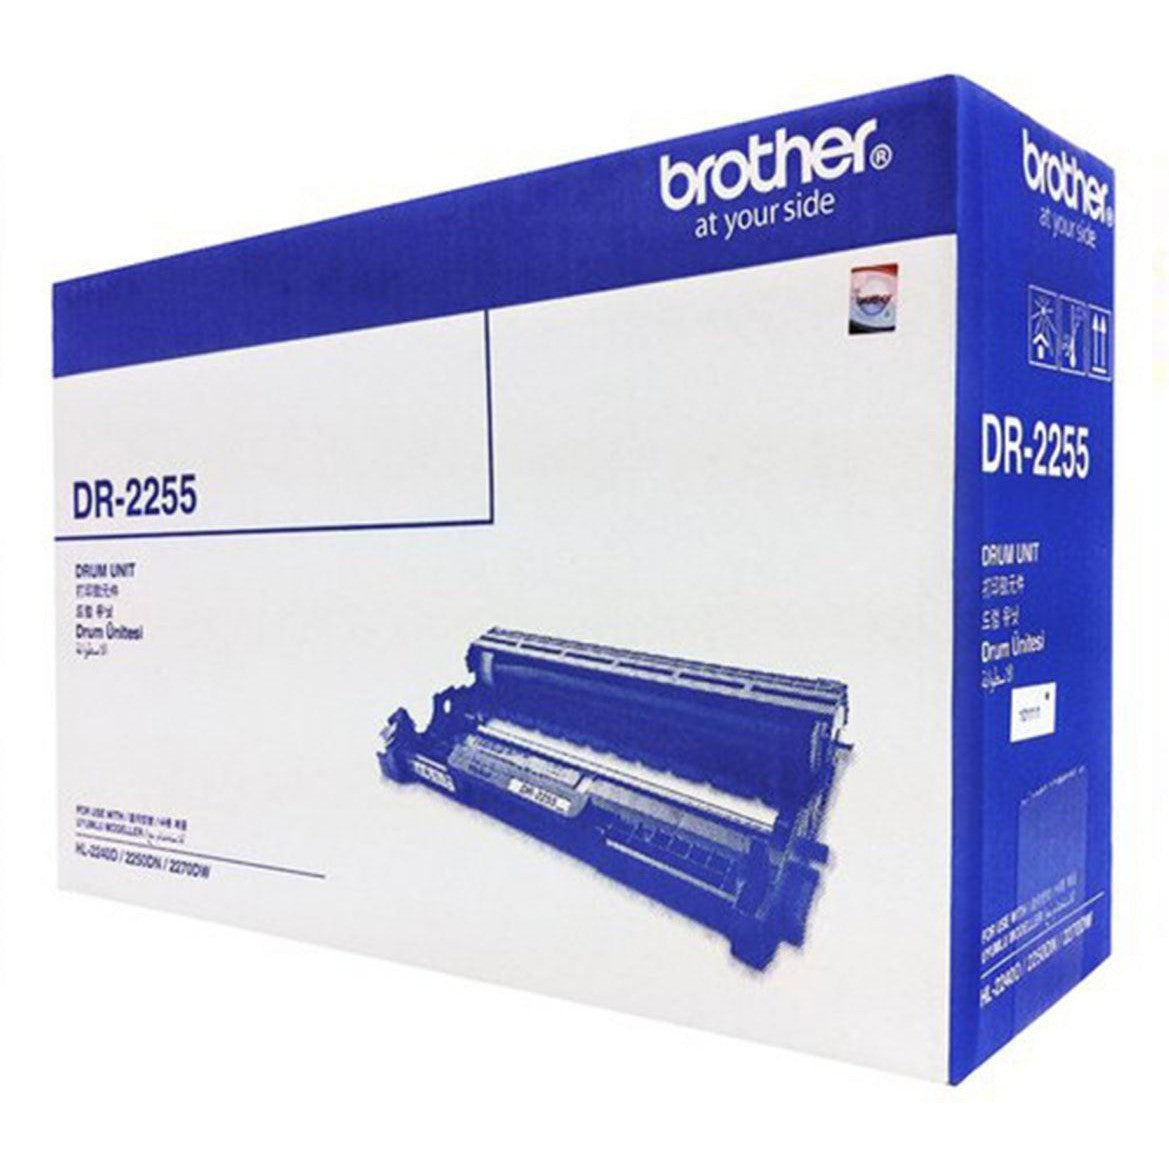 Brother Dr 2255 Drum Cartridge-Inks And Toners-Brother-Star Light Kuwait